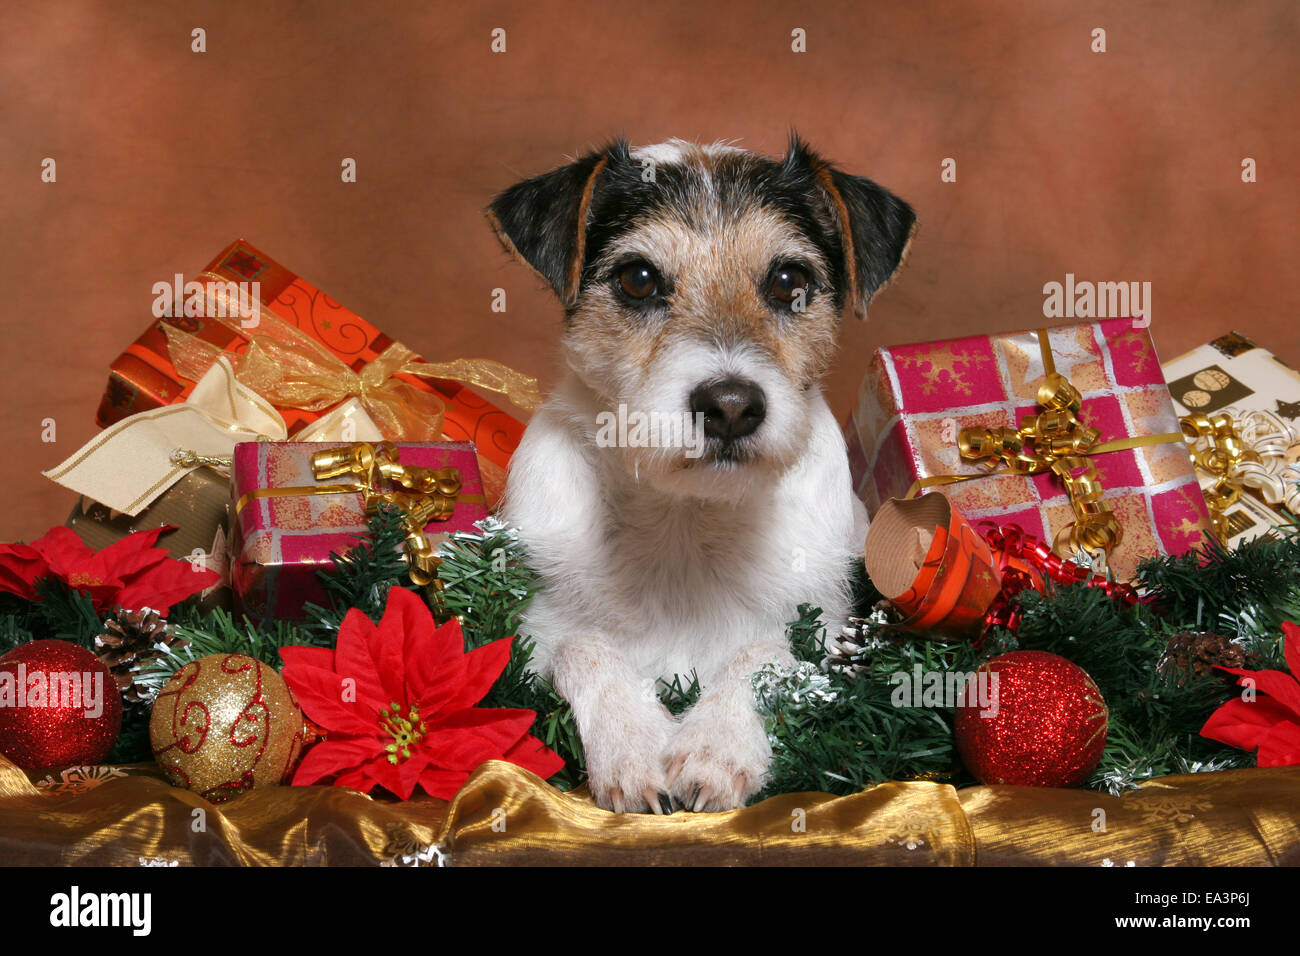 Parson Jack Russell Terrier at christmas Stock Photo